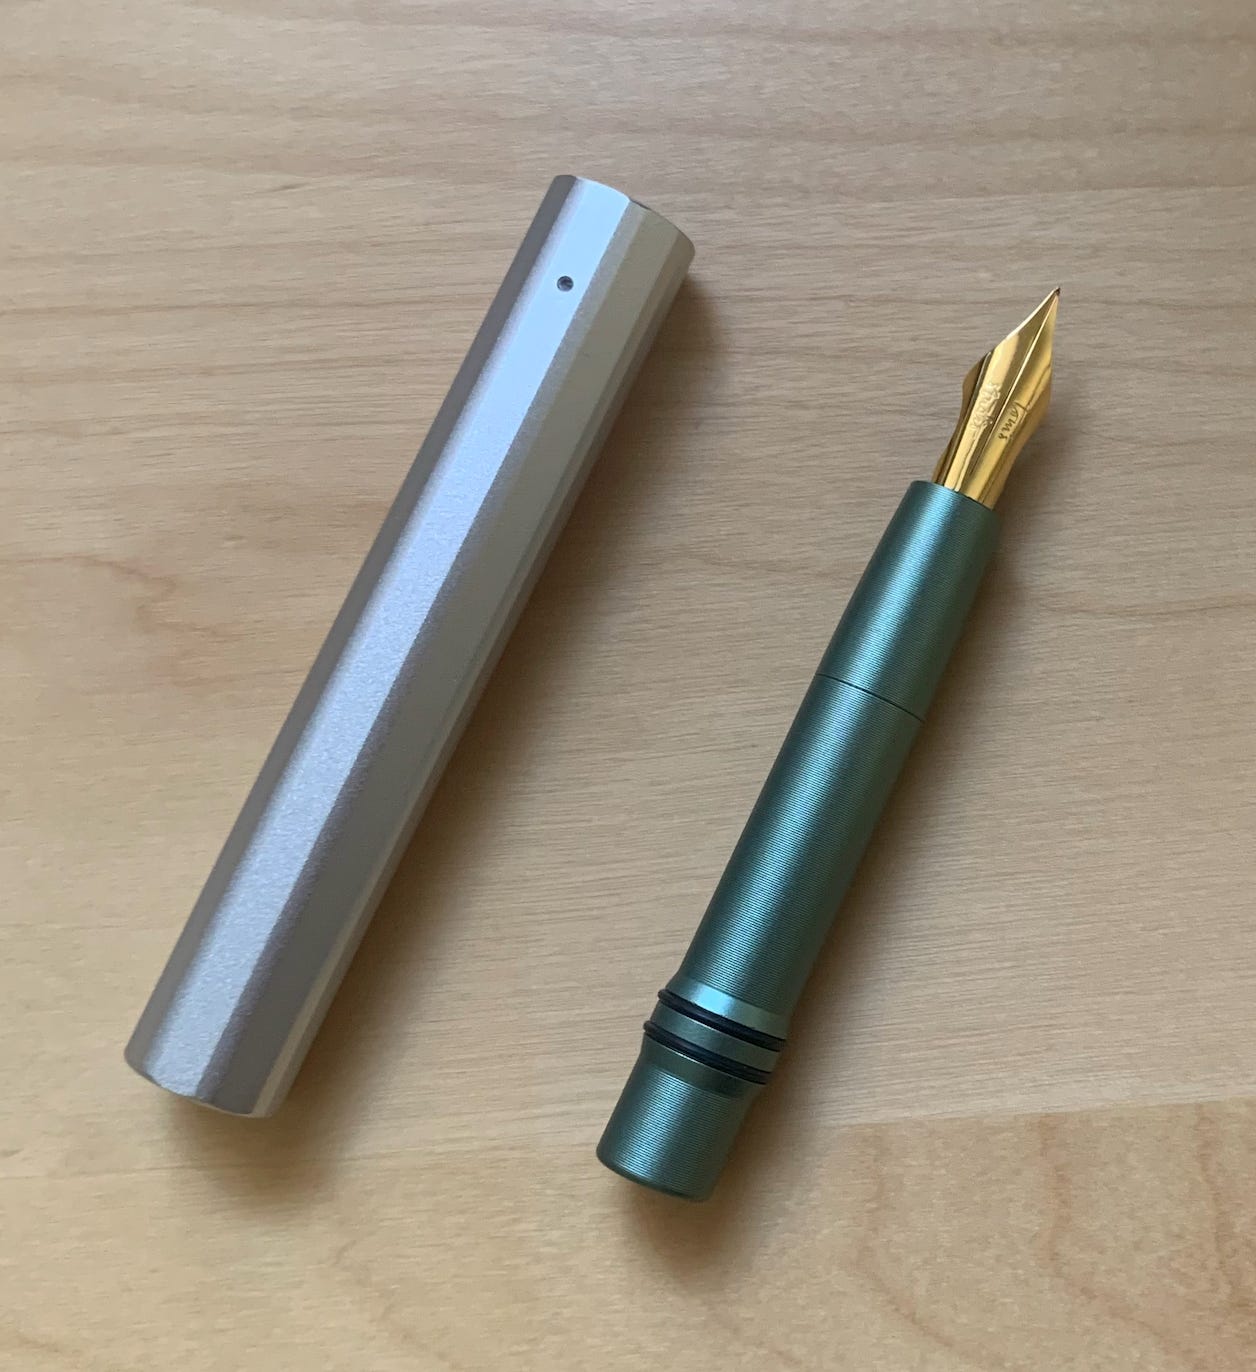 Tom's Studio makes the best pocket fountain pen for people with